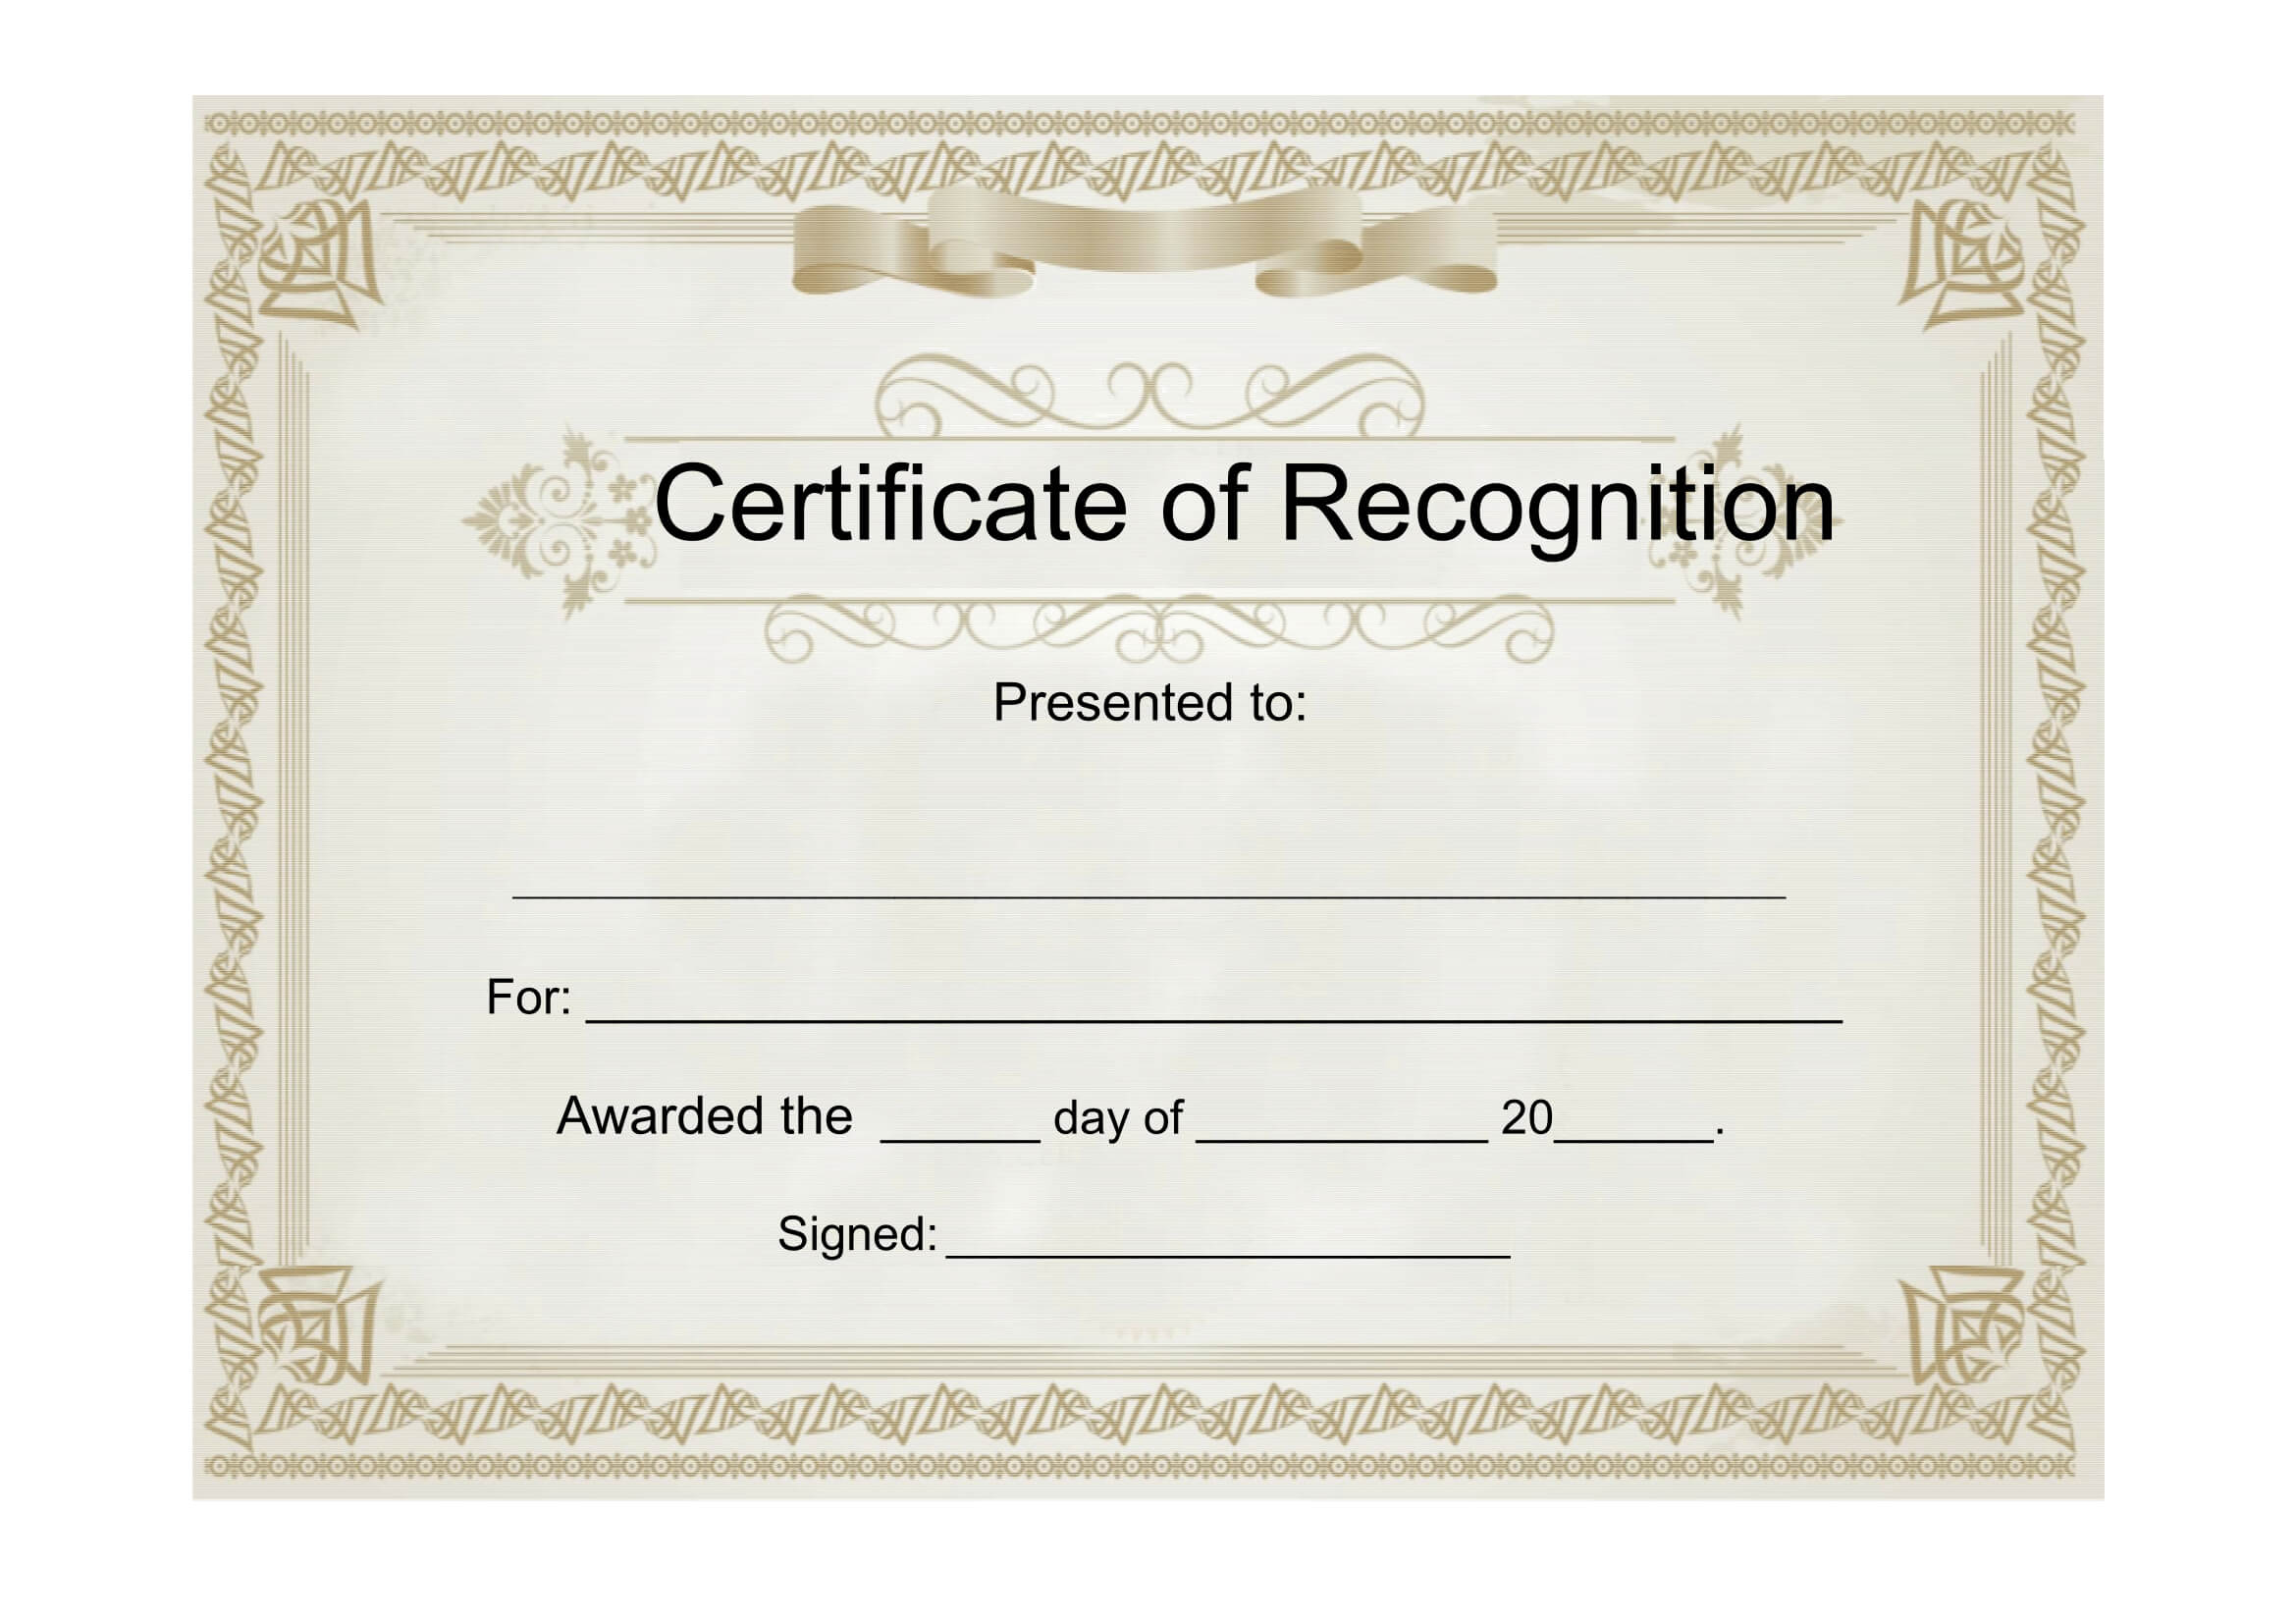 Sample Certificate Of Recognition - Free Download Template With Regard To Sample Certificate Of Recognition Template